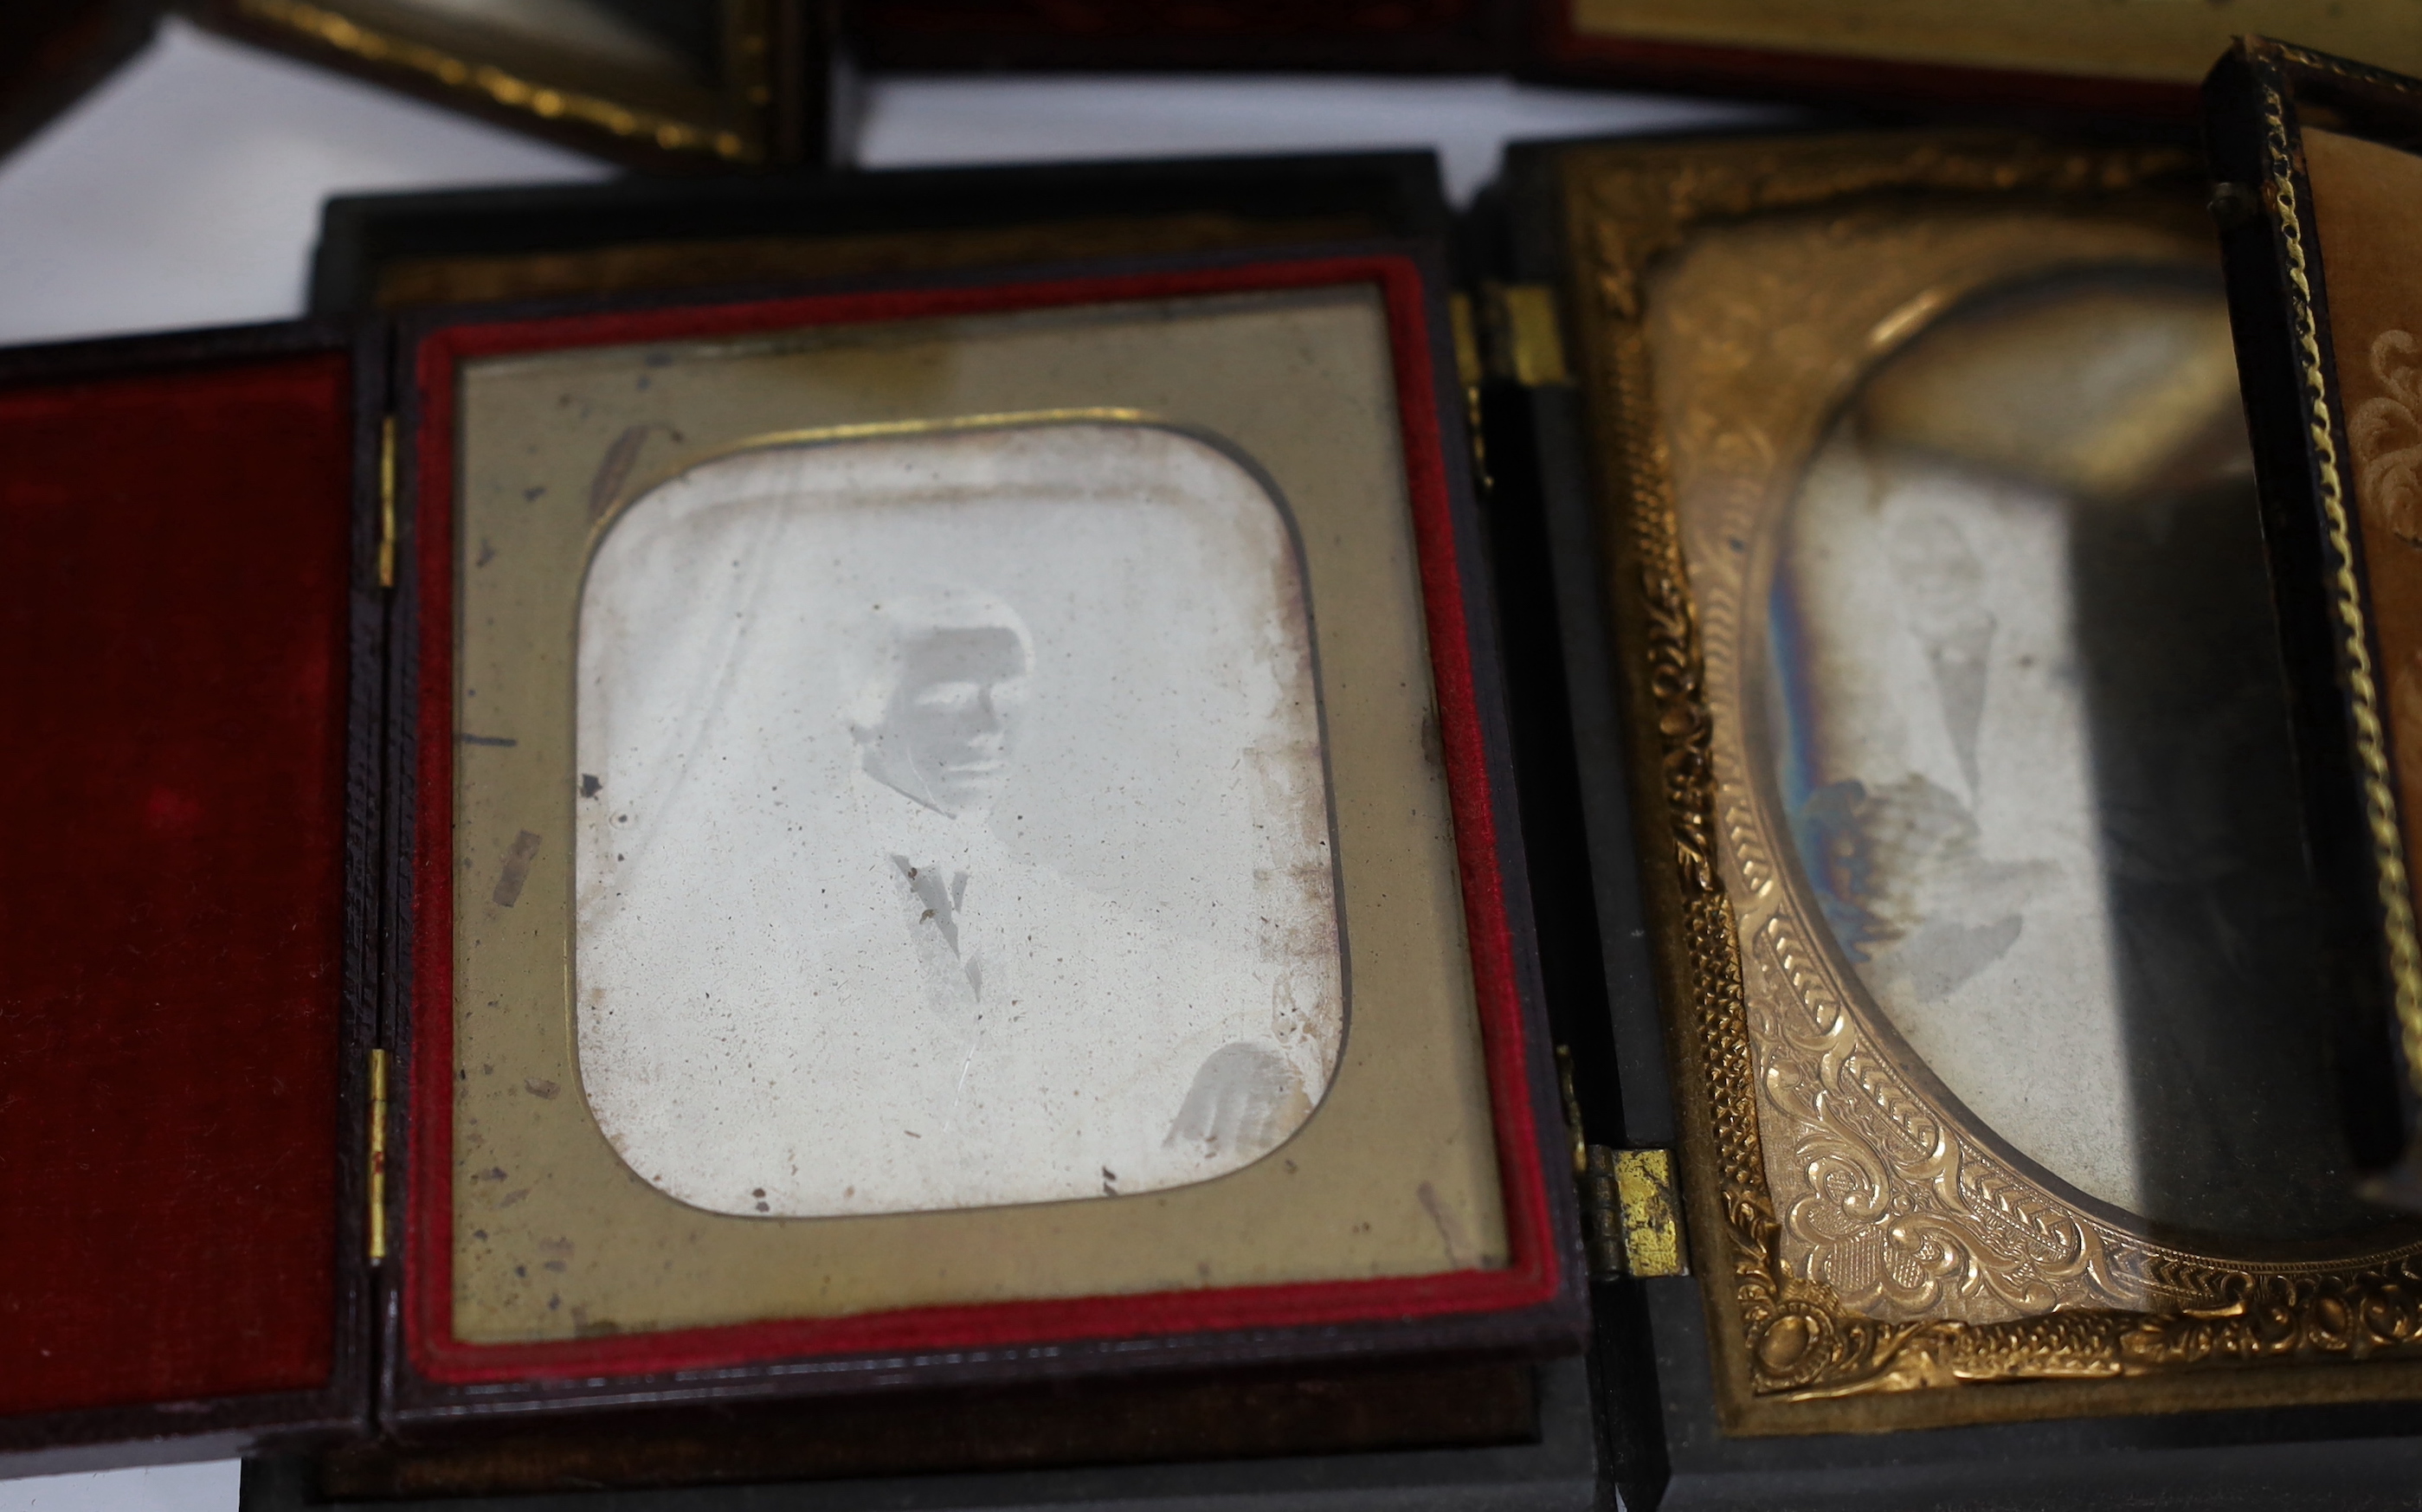 Nine mid 19th century daguerreotype portrait photographs, all mounted in brass, etc. frames, some in decorative cases, one example framed